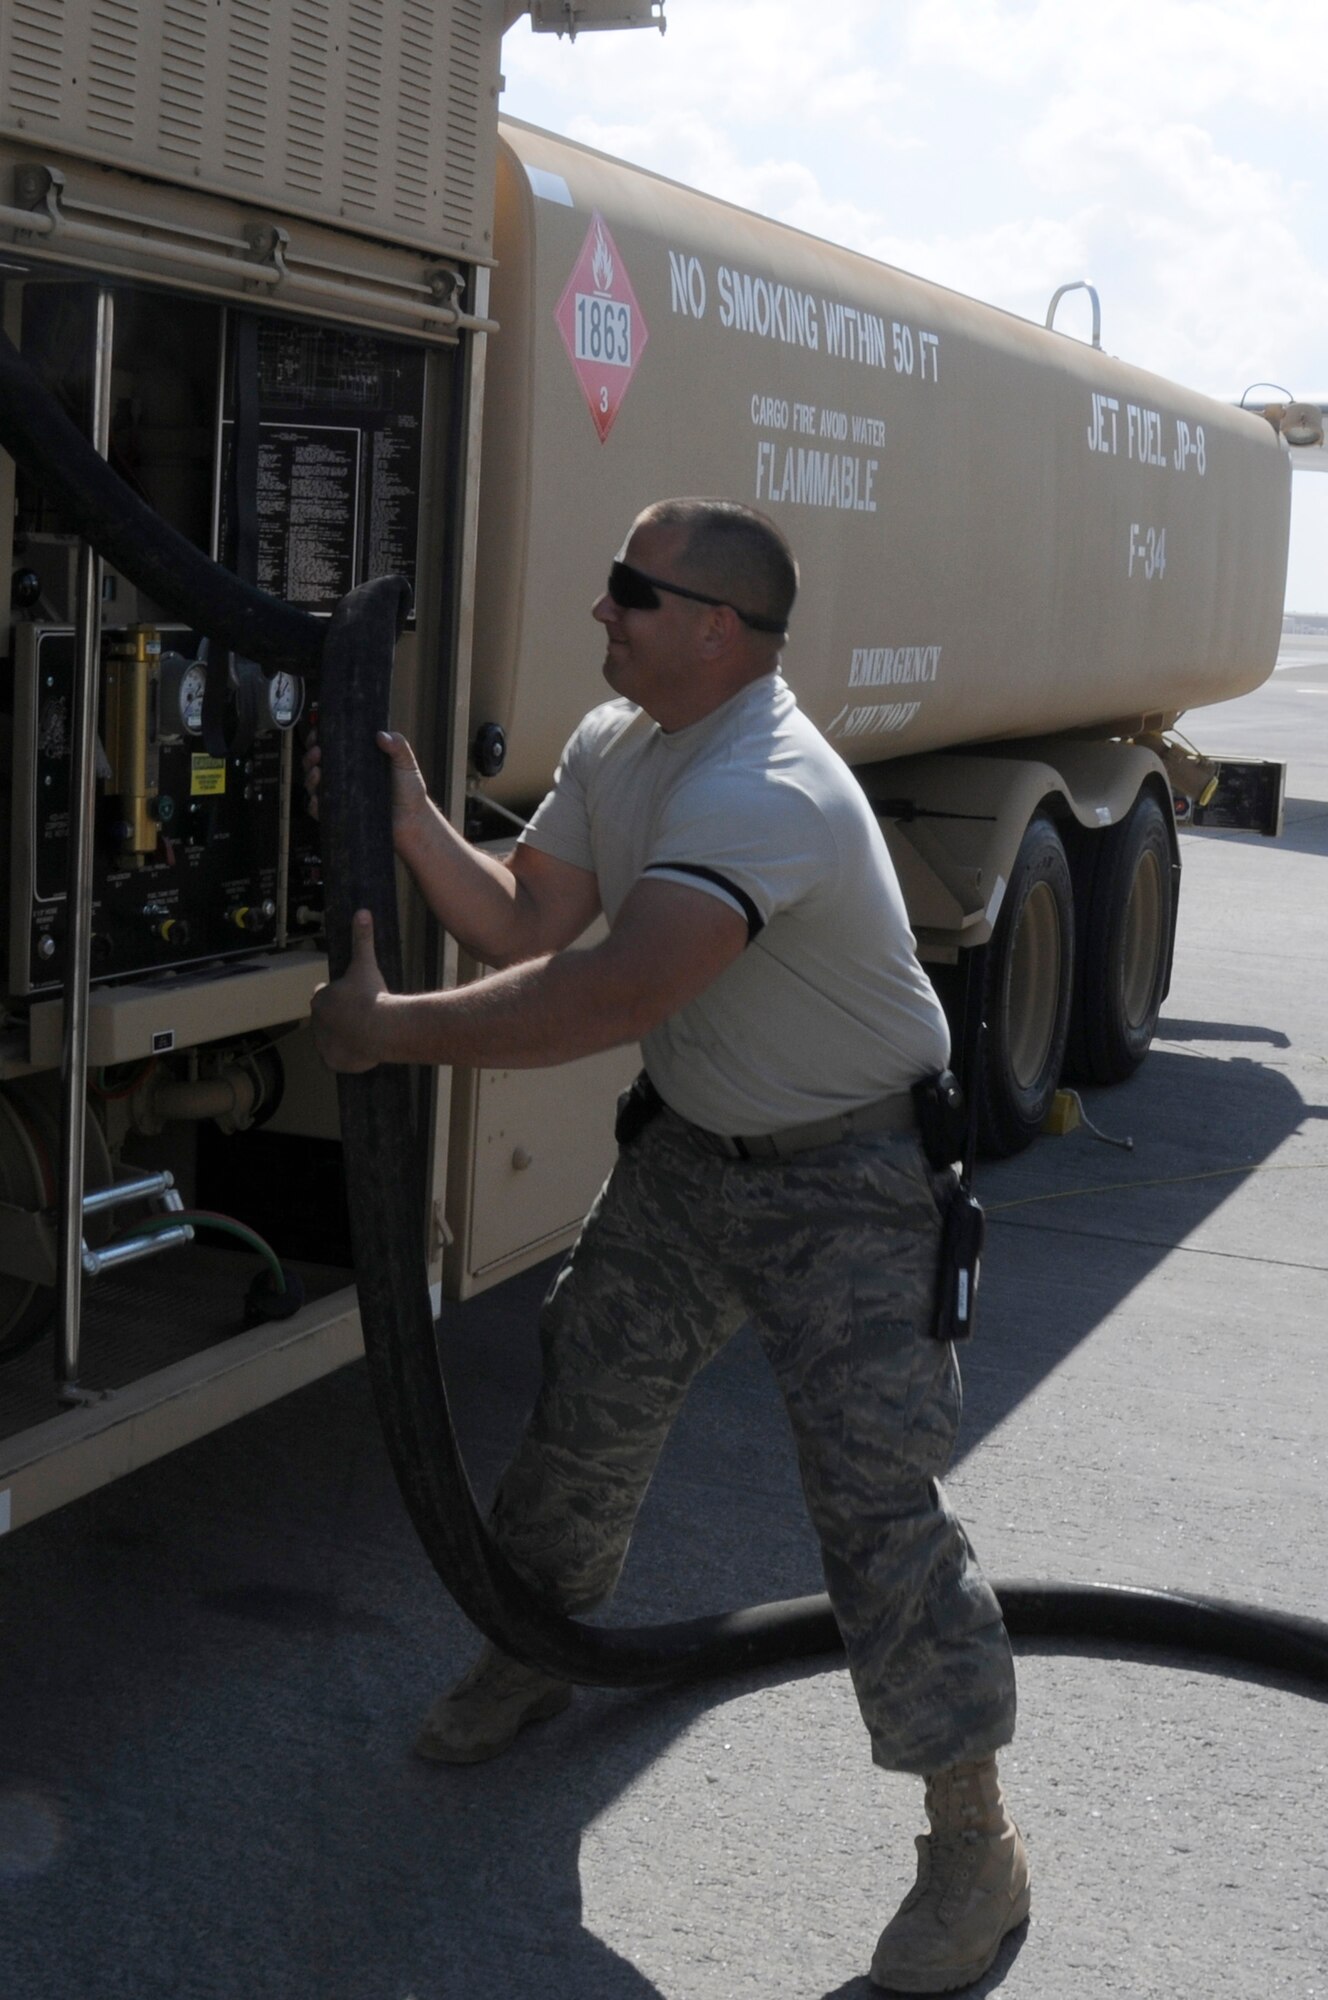 SOUTHWEST ASIA -- Staff Sgt. Joshua Schubert, 380th Expeditionary Logistics Readiness Squadron distribution supervisor straightens the hose on an R-11 6,000 gallon fuel truck, Jan 21. Sergeant Schubert was assisting during a refueling of an E-3 Sentry. Sergeant Schubert performs checks at random to ensure proper procedures are followed during aircraft refueling. Sergeant Schubert is deployed from Eglin AFB, Fla. and is from Hatboro, Pa. (U.S. Air Force photo by Senior Airman Brian J. Ellis) (Released)